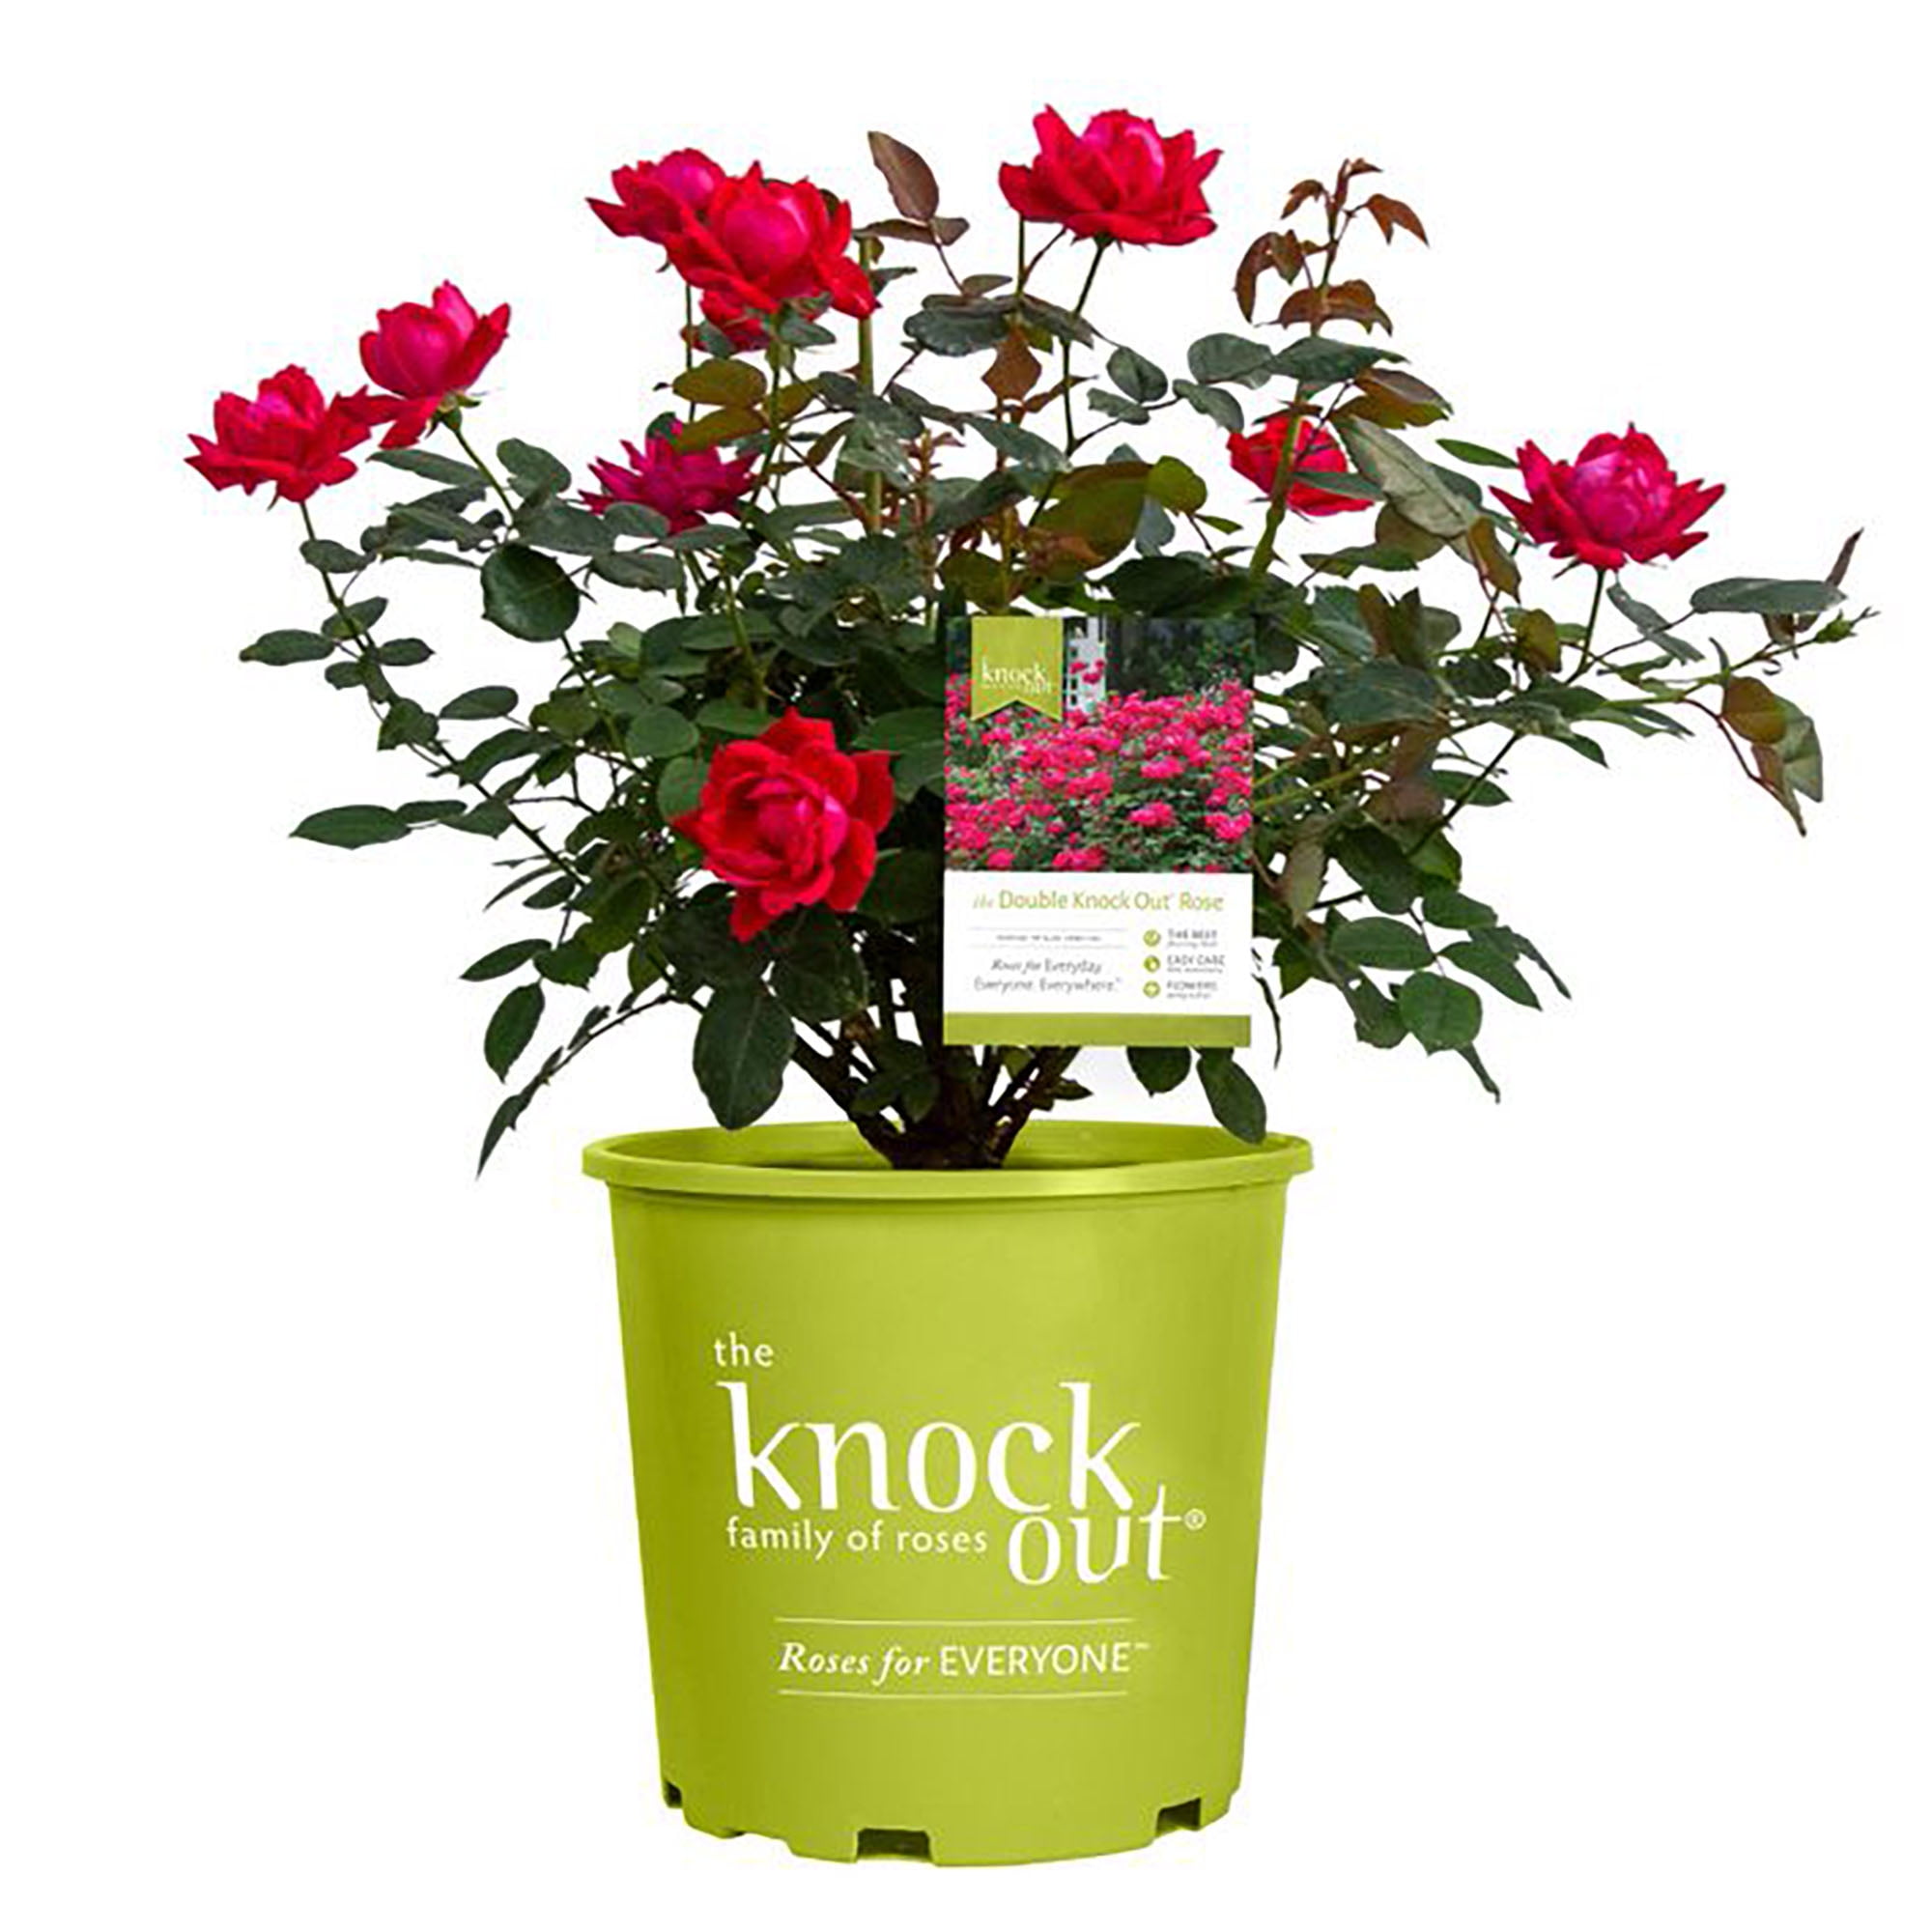 The Red Double Knock Out® Rose Live Shrubs with Vibrant Cherry Red ...